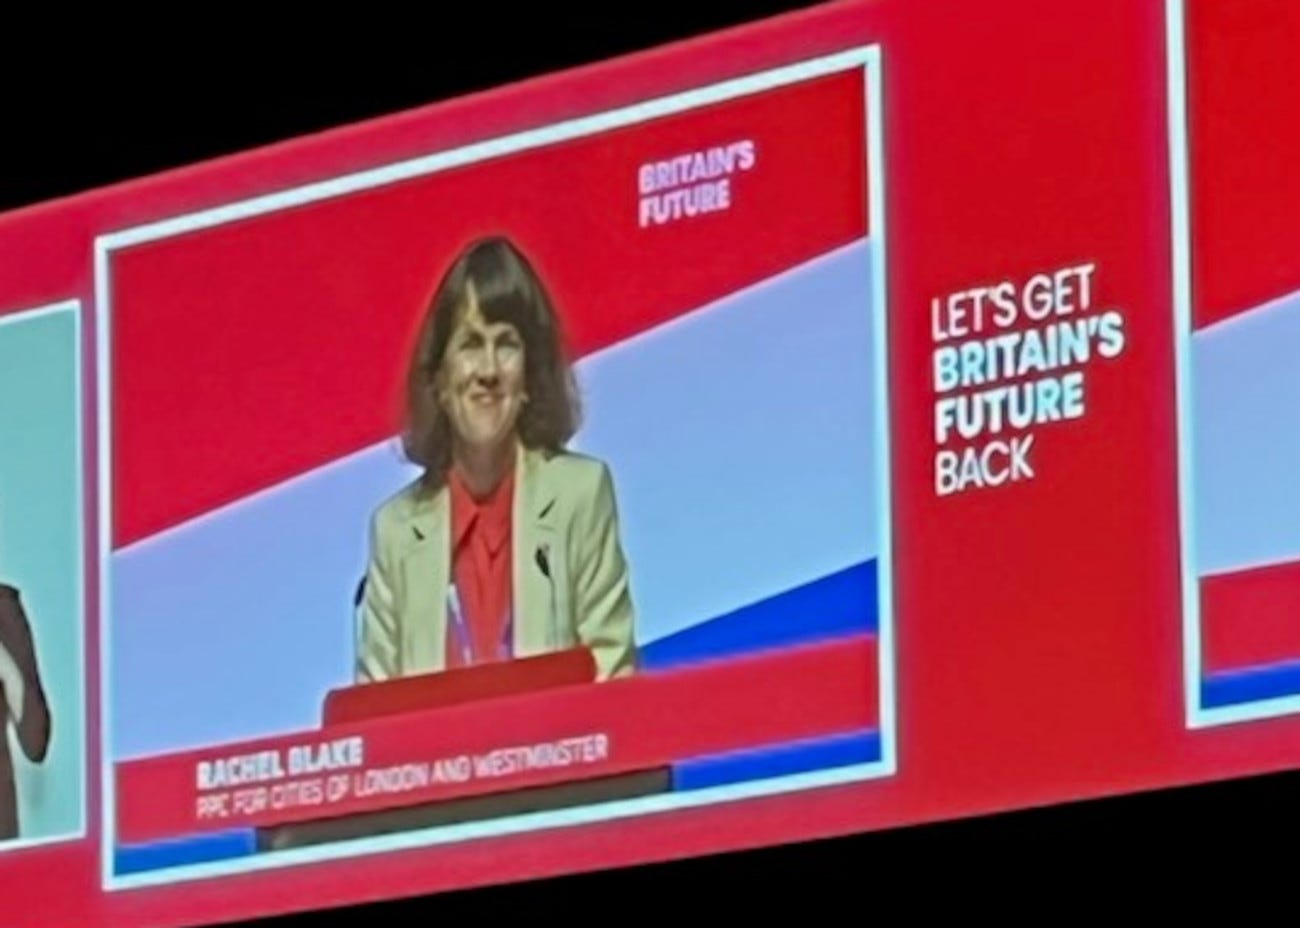 Rachel Blake image on a big screen at Labour conference.